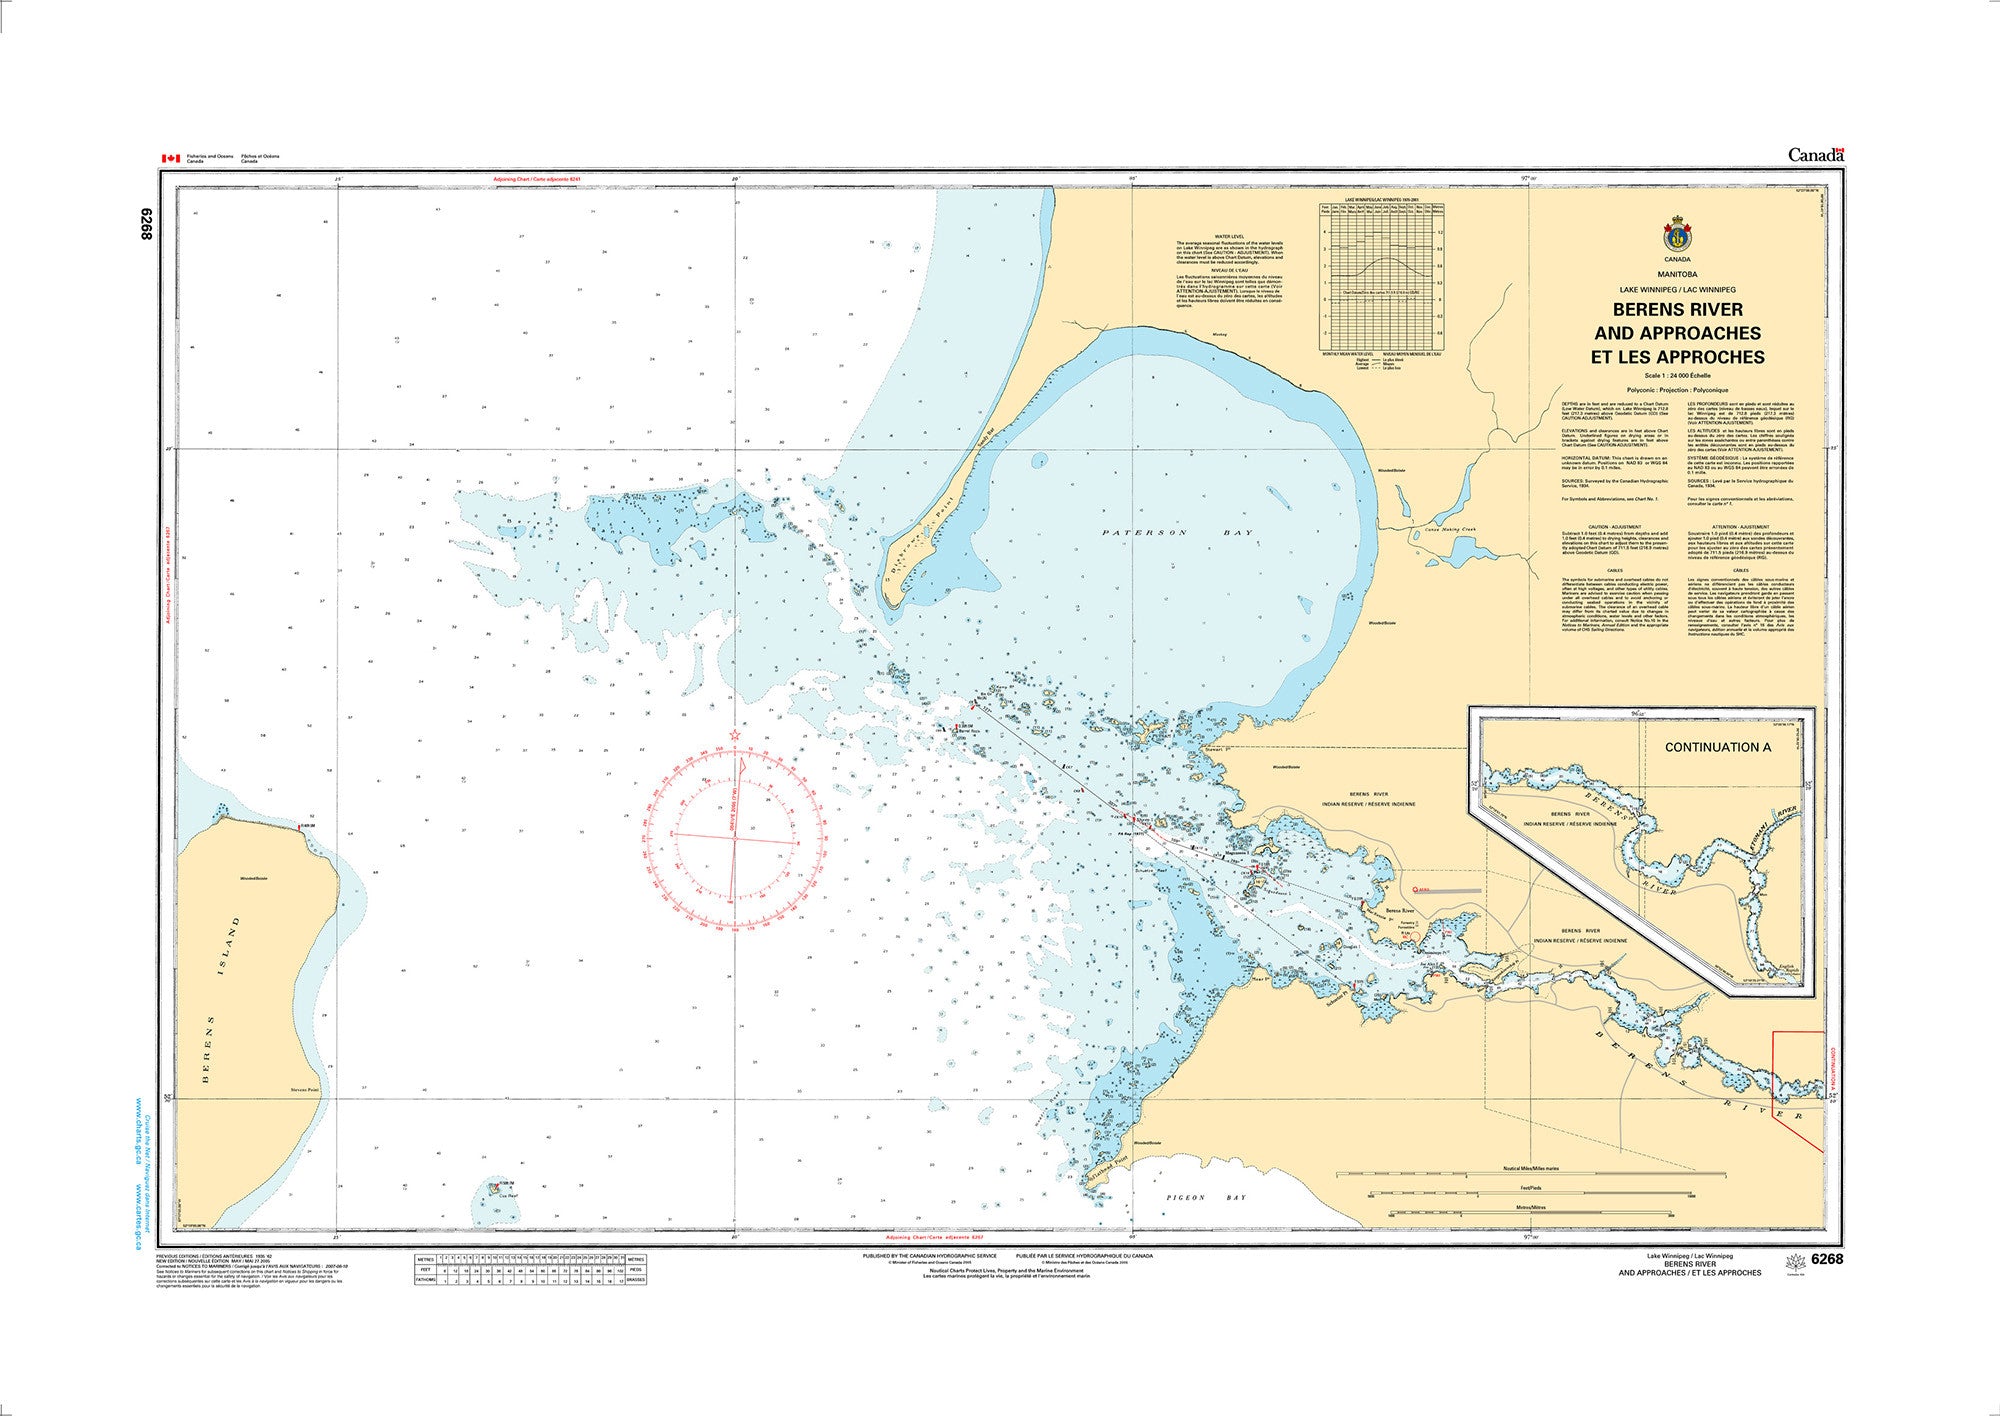 Canadian Hydrographic Service Nautical Chart CHS6268: Berens River and Approaches/et les Approches